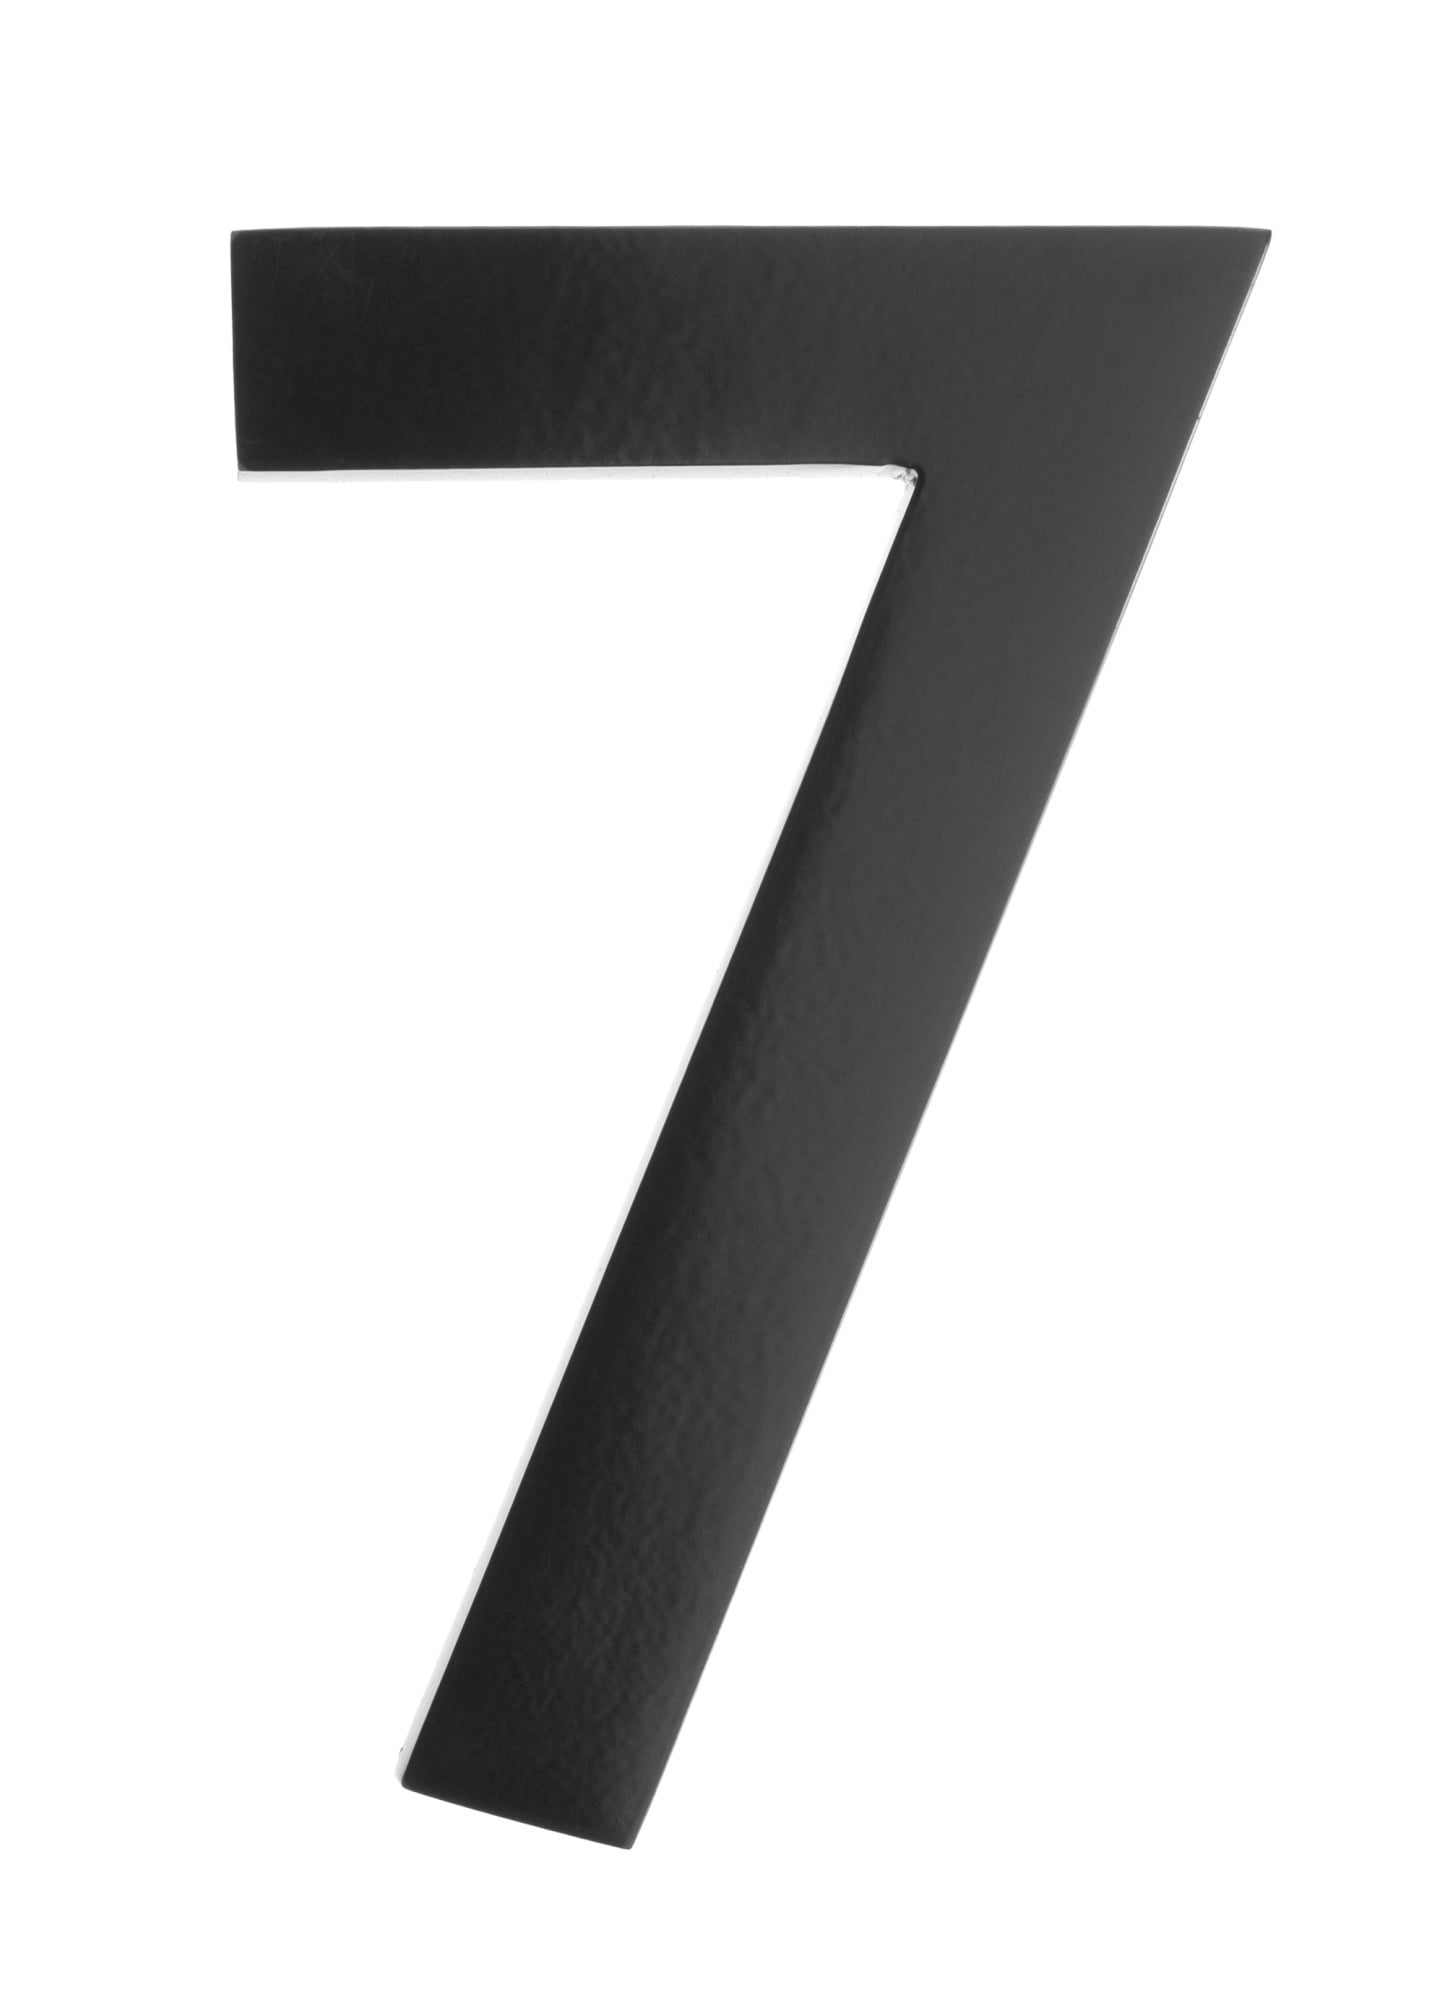 3582b-7 Floating House Number 7, Black - 4 In.